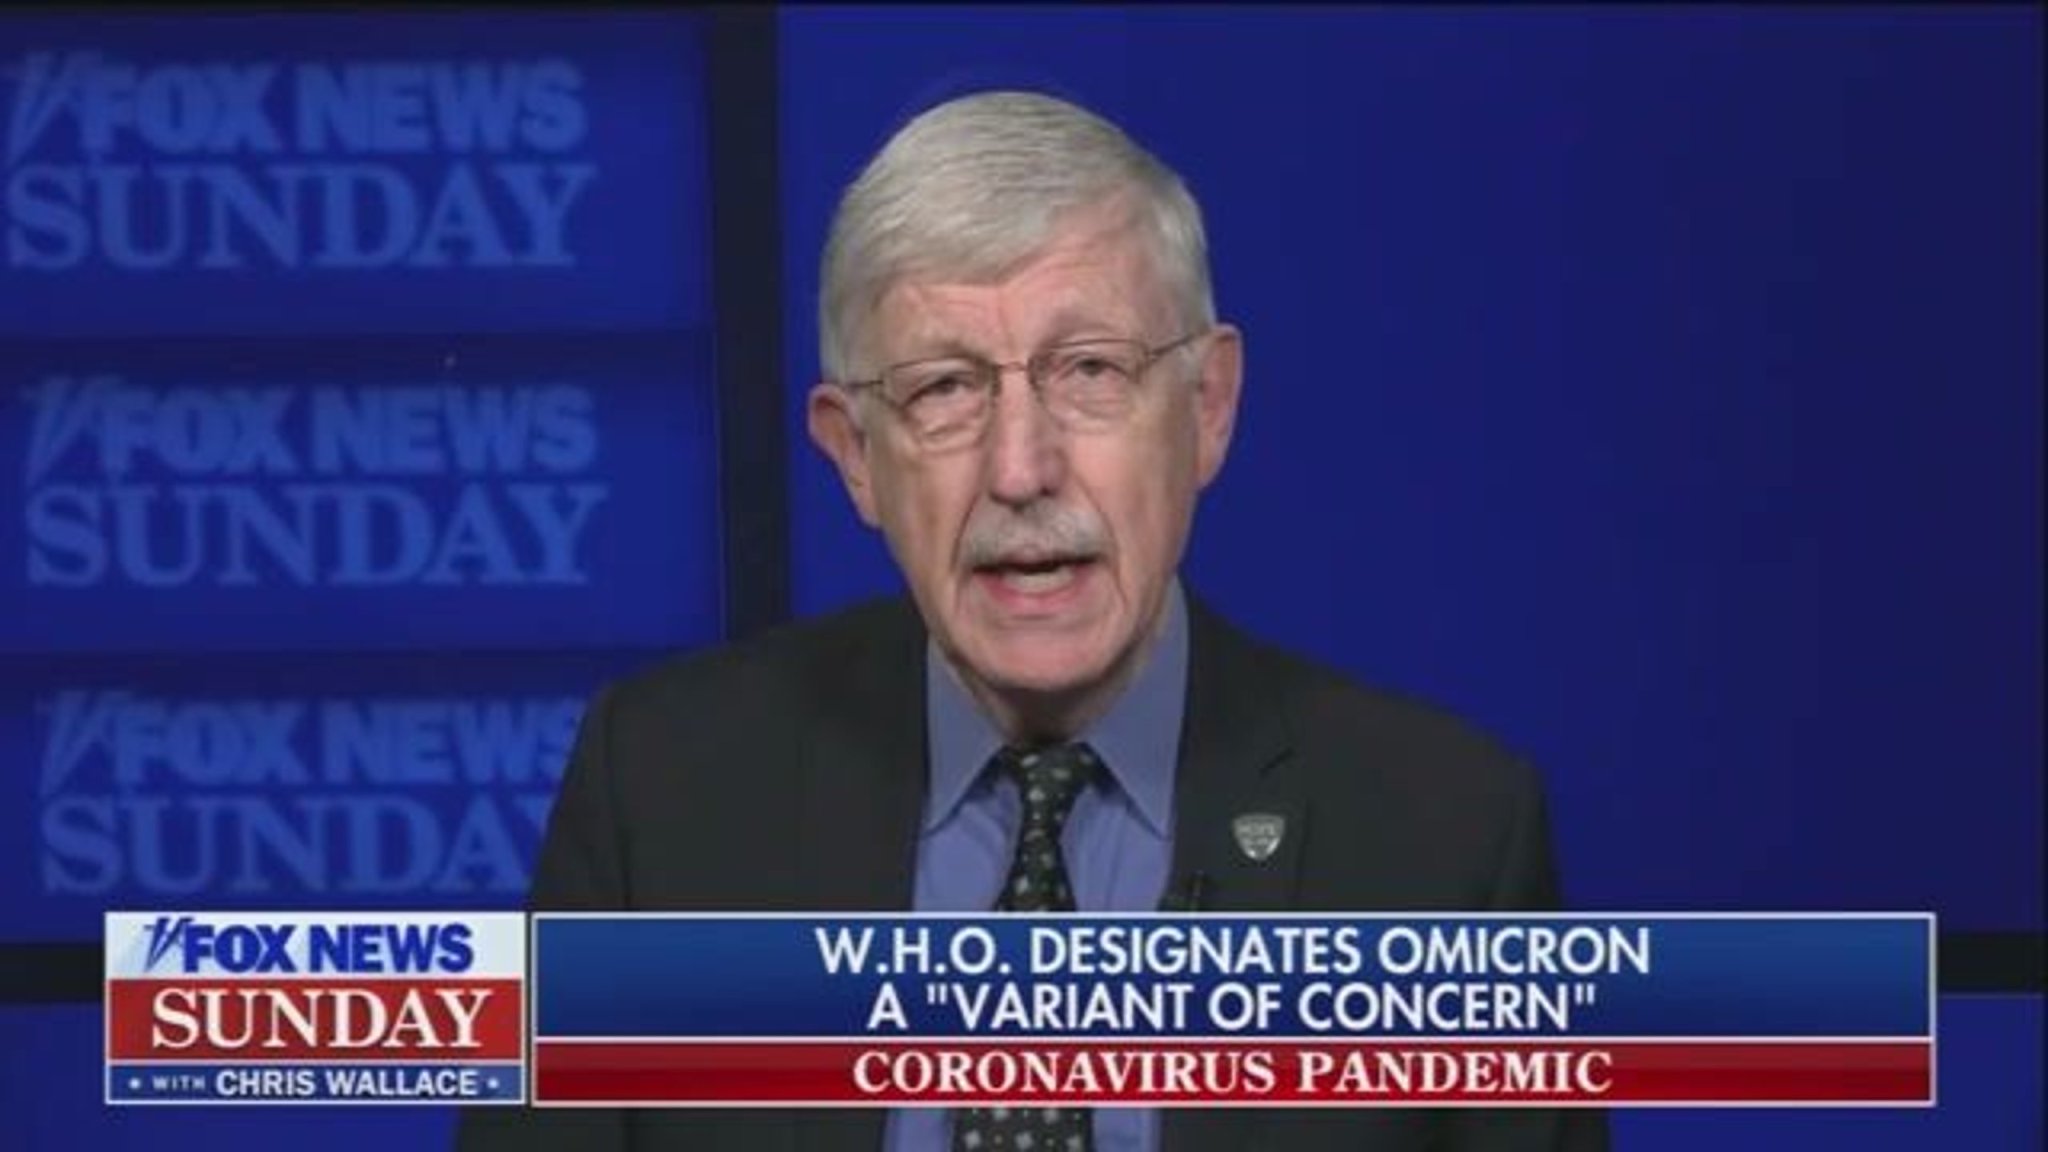 NIH Director Dr. Collins says Omicron COVID variant has a record number of mutations: “It does make you worry ...”